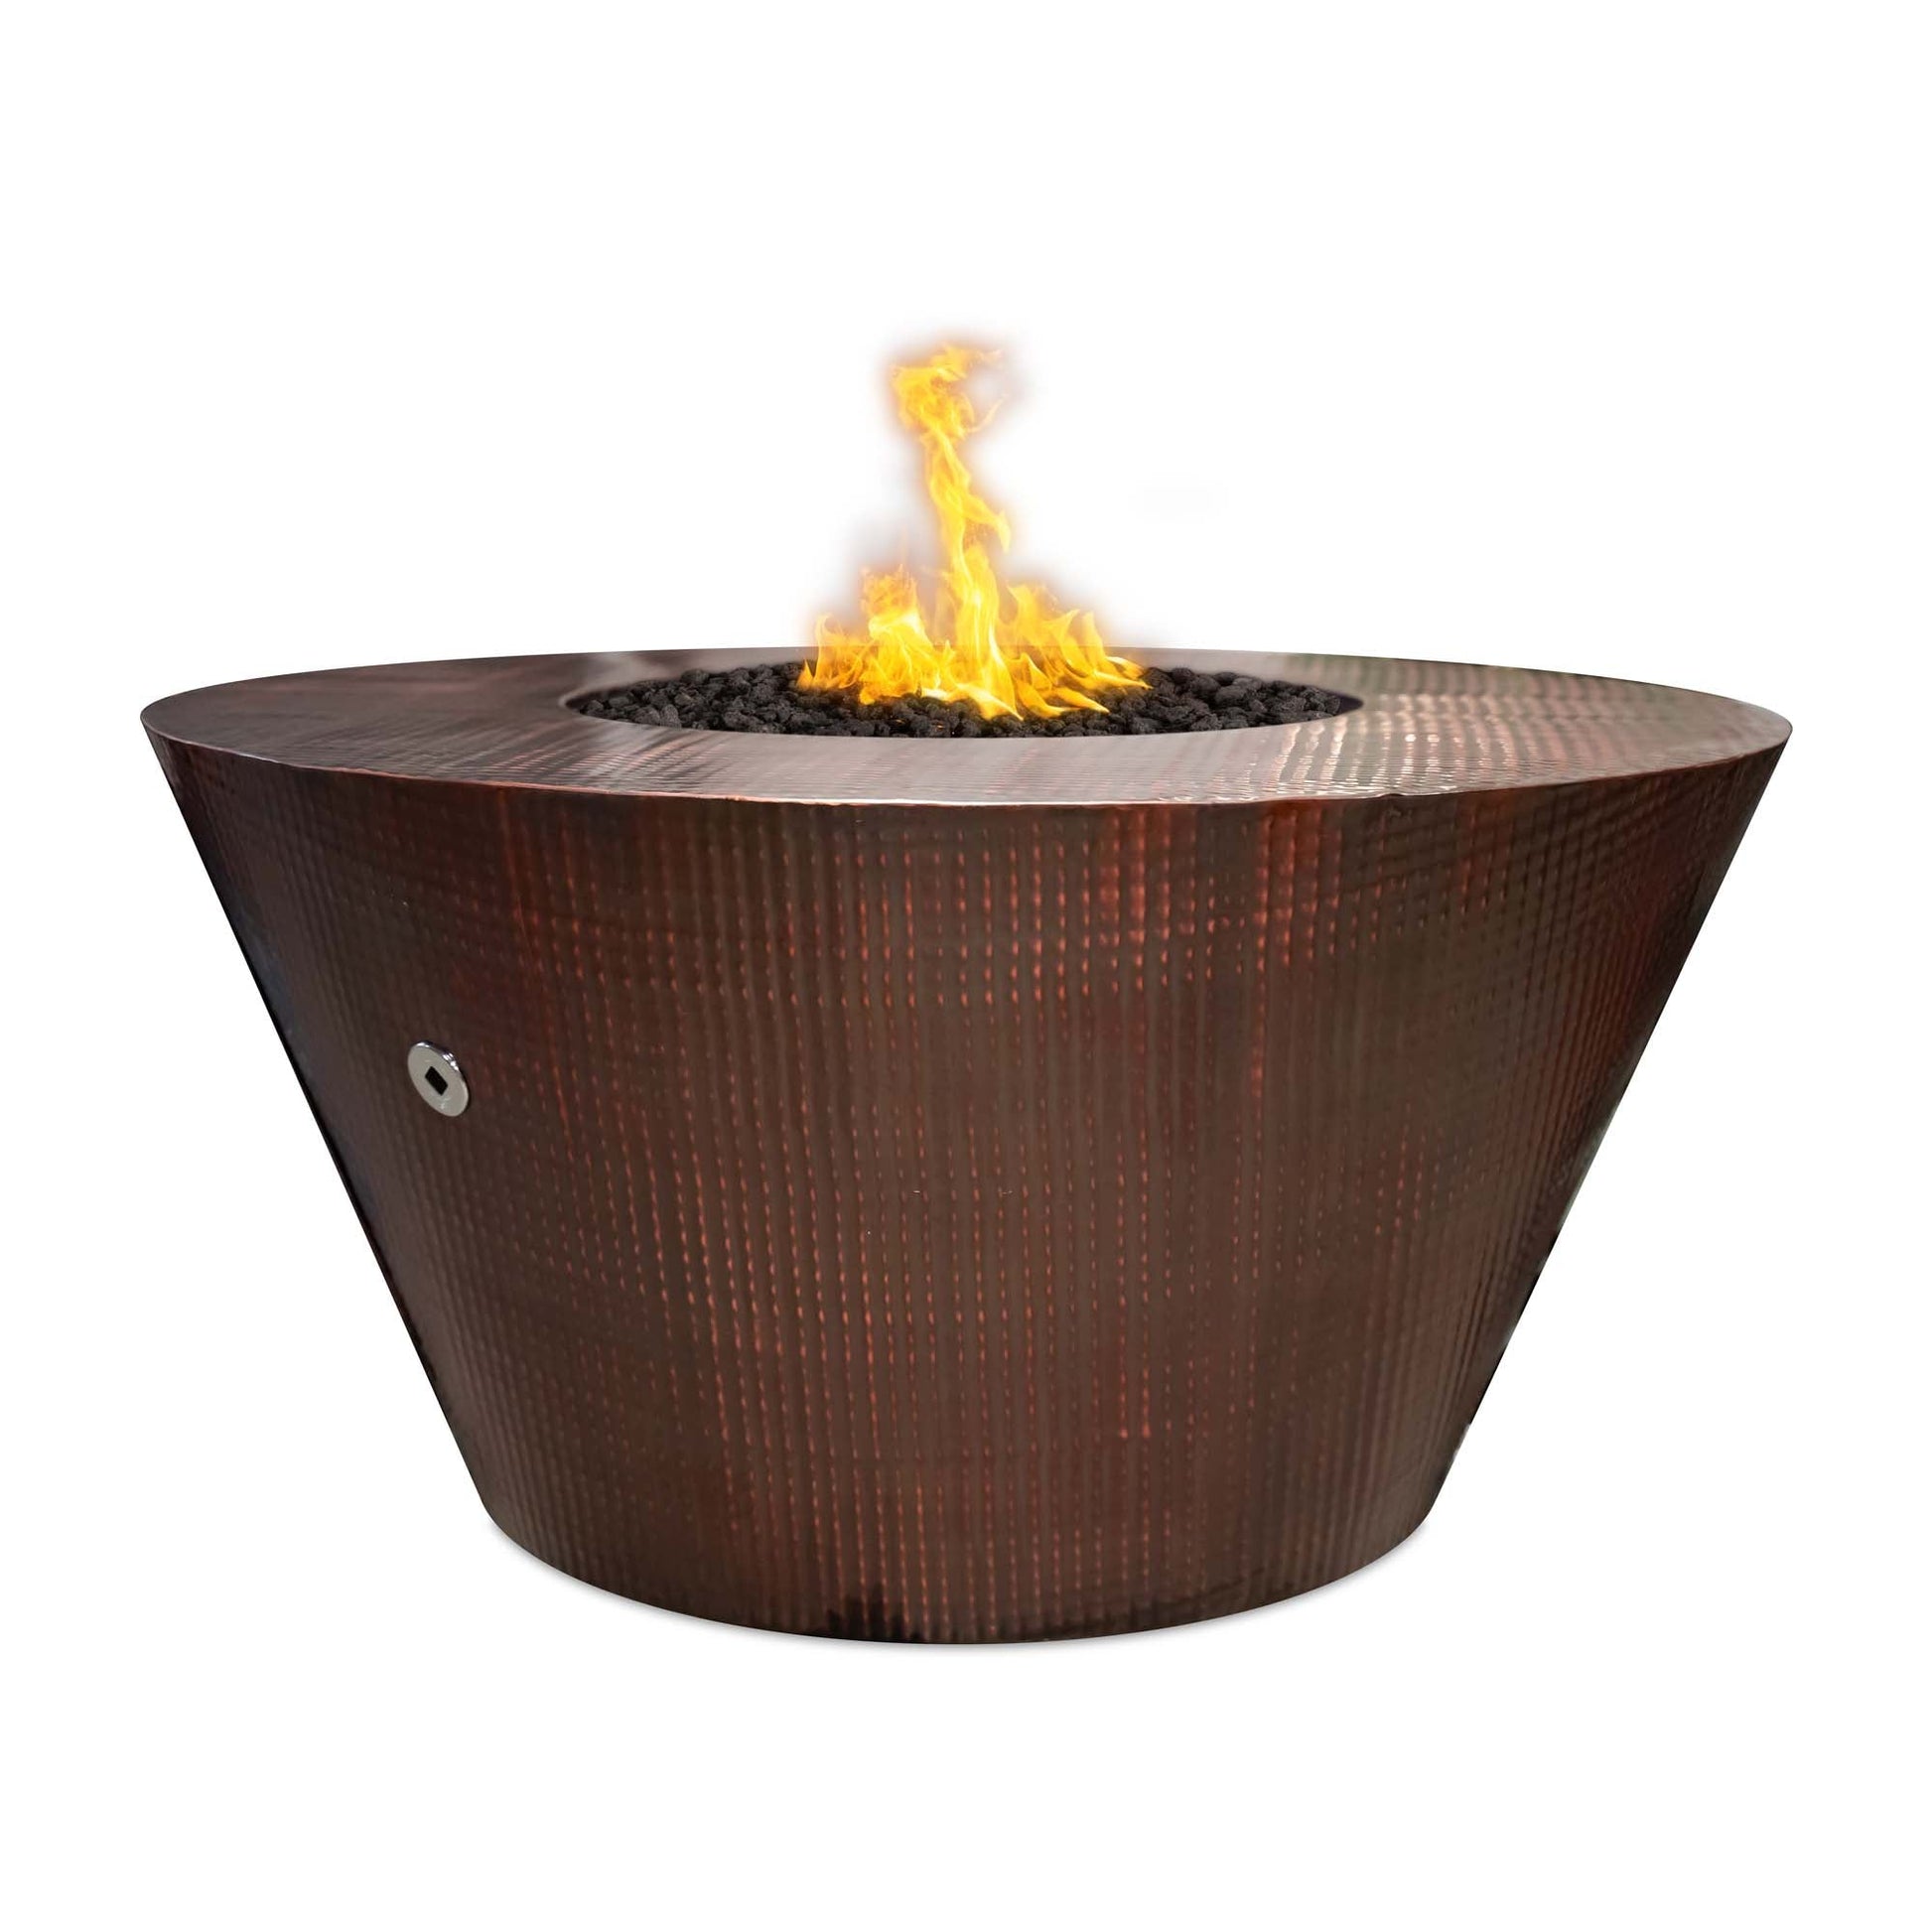 The Outdoor Plus Round Martillo 48" Stainless Steel Natural Gas Fire Pit with 110V Electronic Ignition